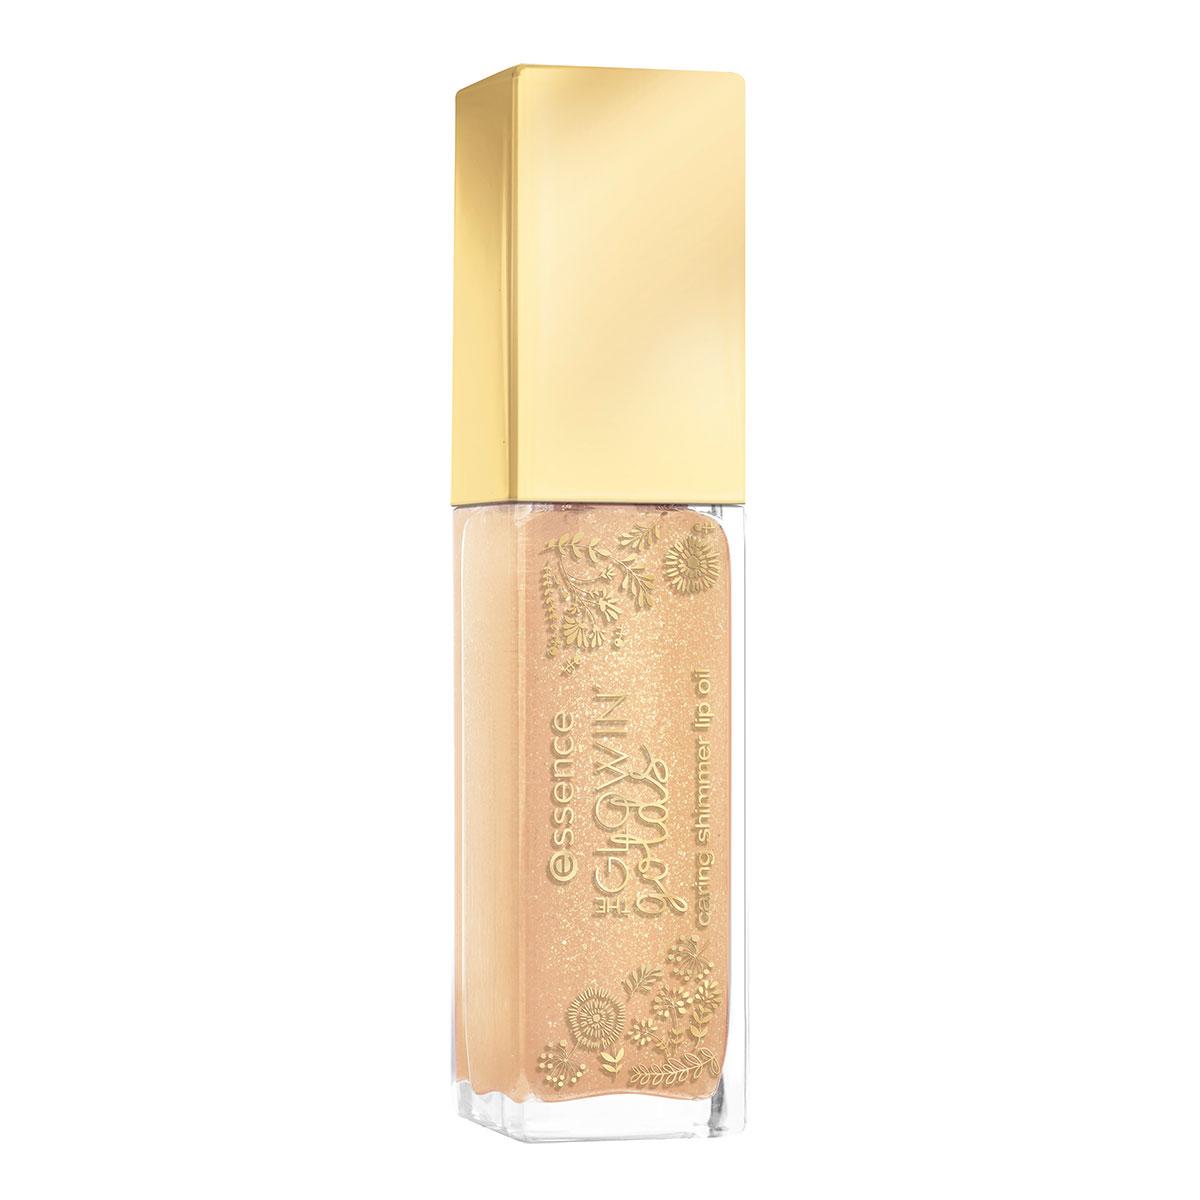 Essence The Glowin' Golds Caring Shimmer Lip Oil 9ml £2.29